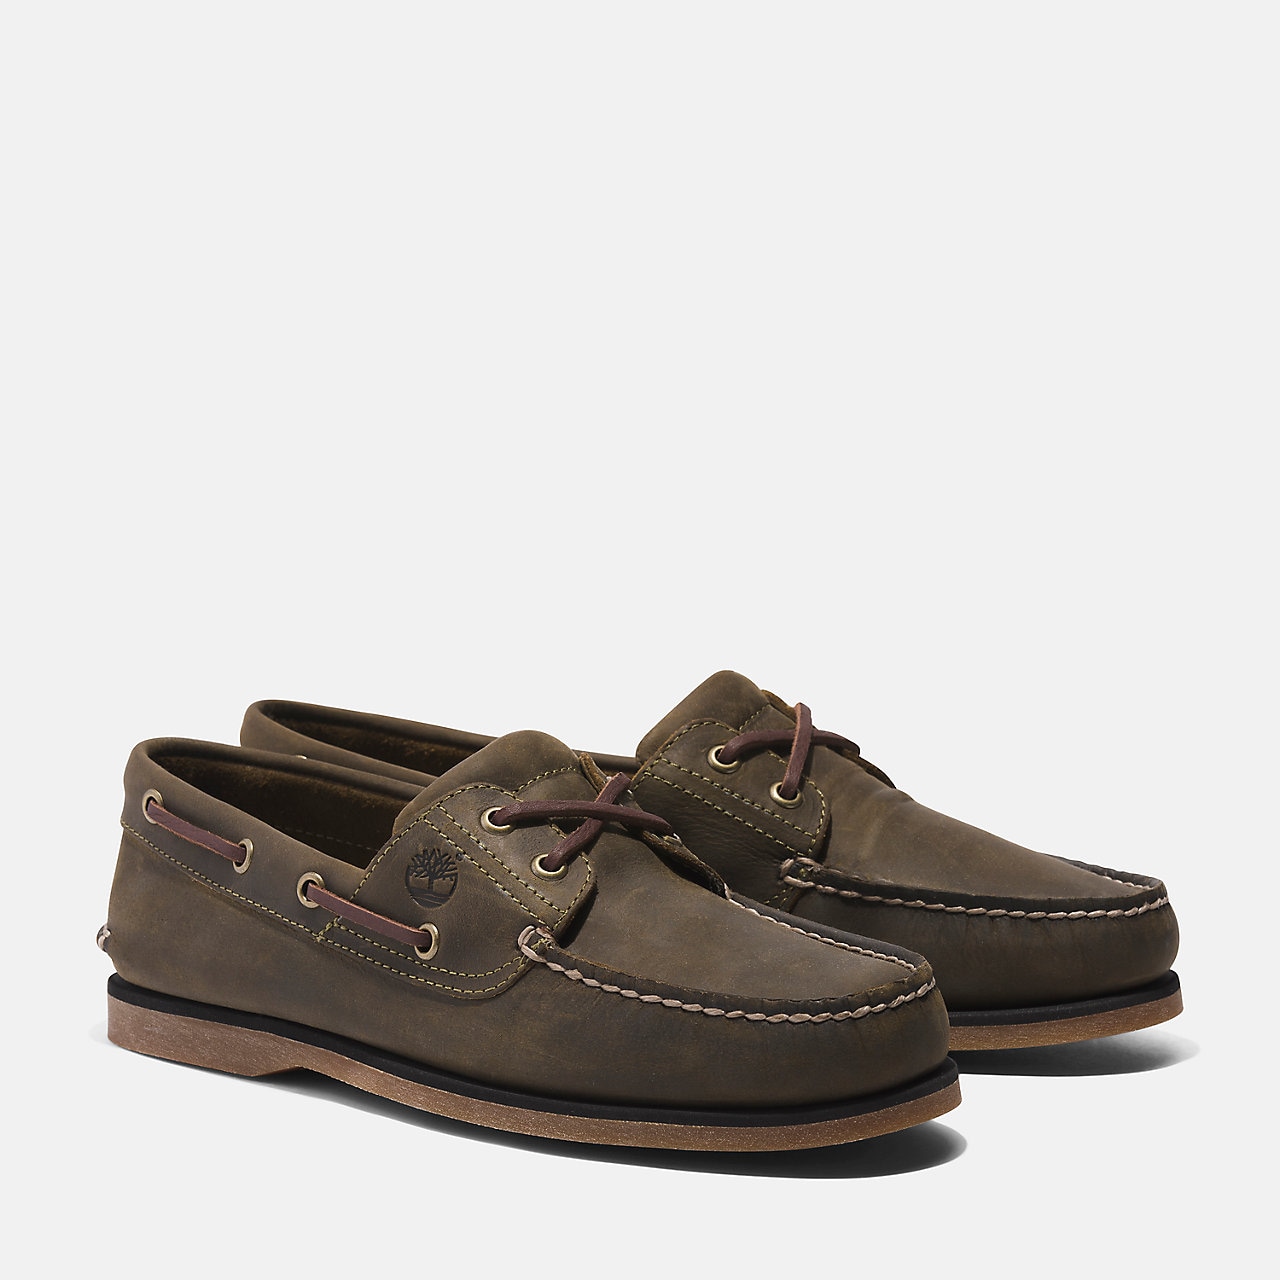 Timberland Bootsschuh »CLASSIC BOAT BOAT SHOE«